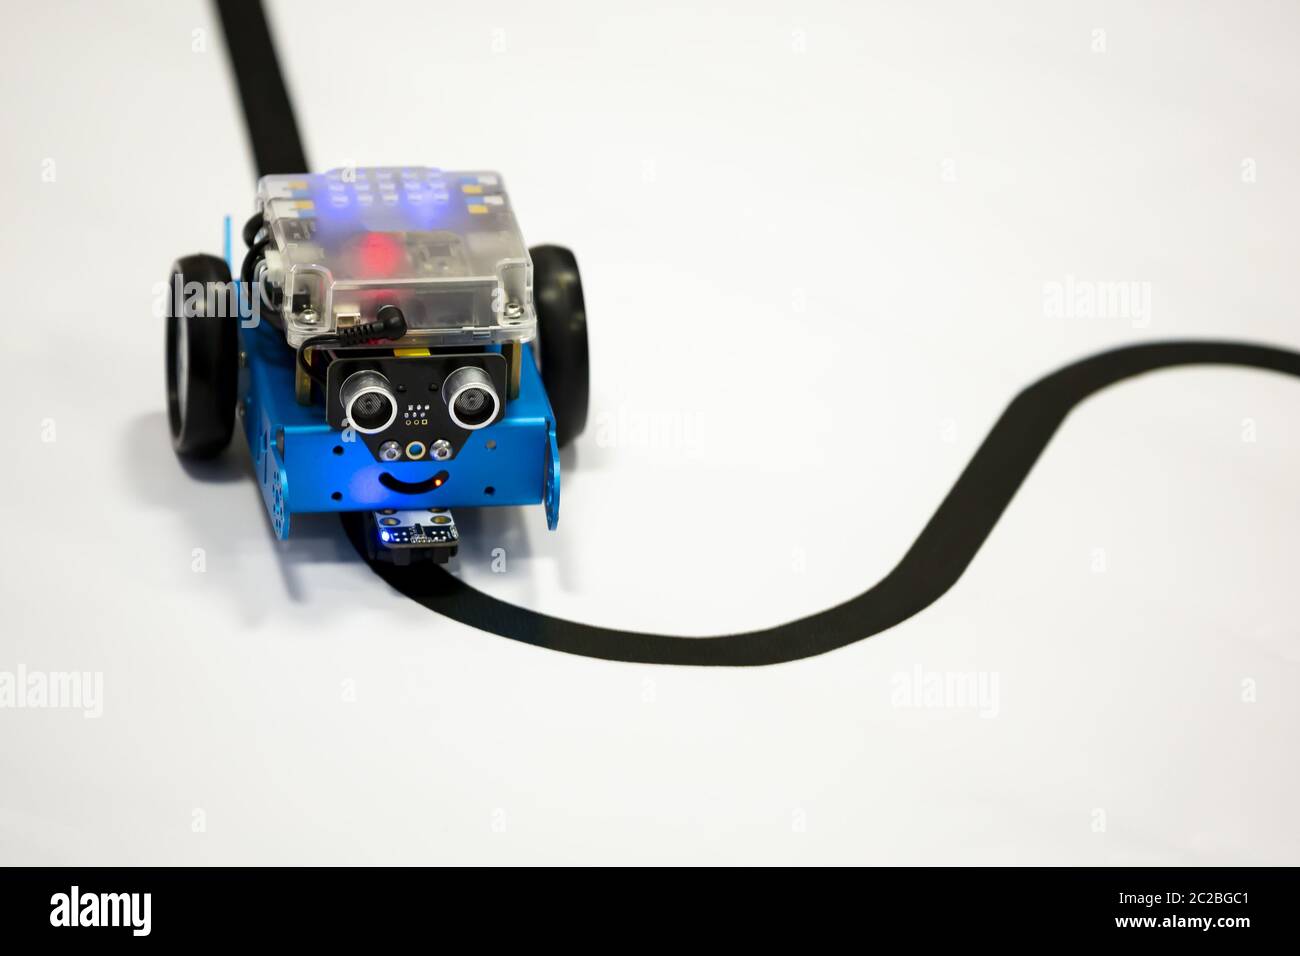 Self-made robot by student Start Stock Photo - Alamy